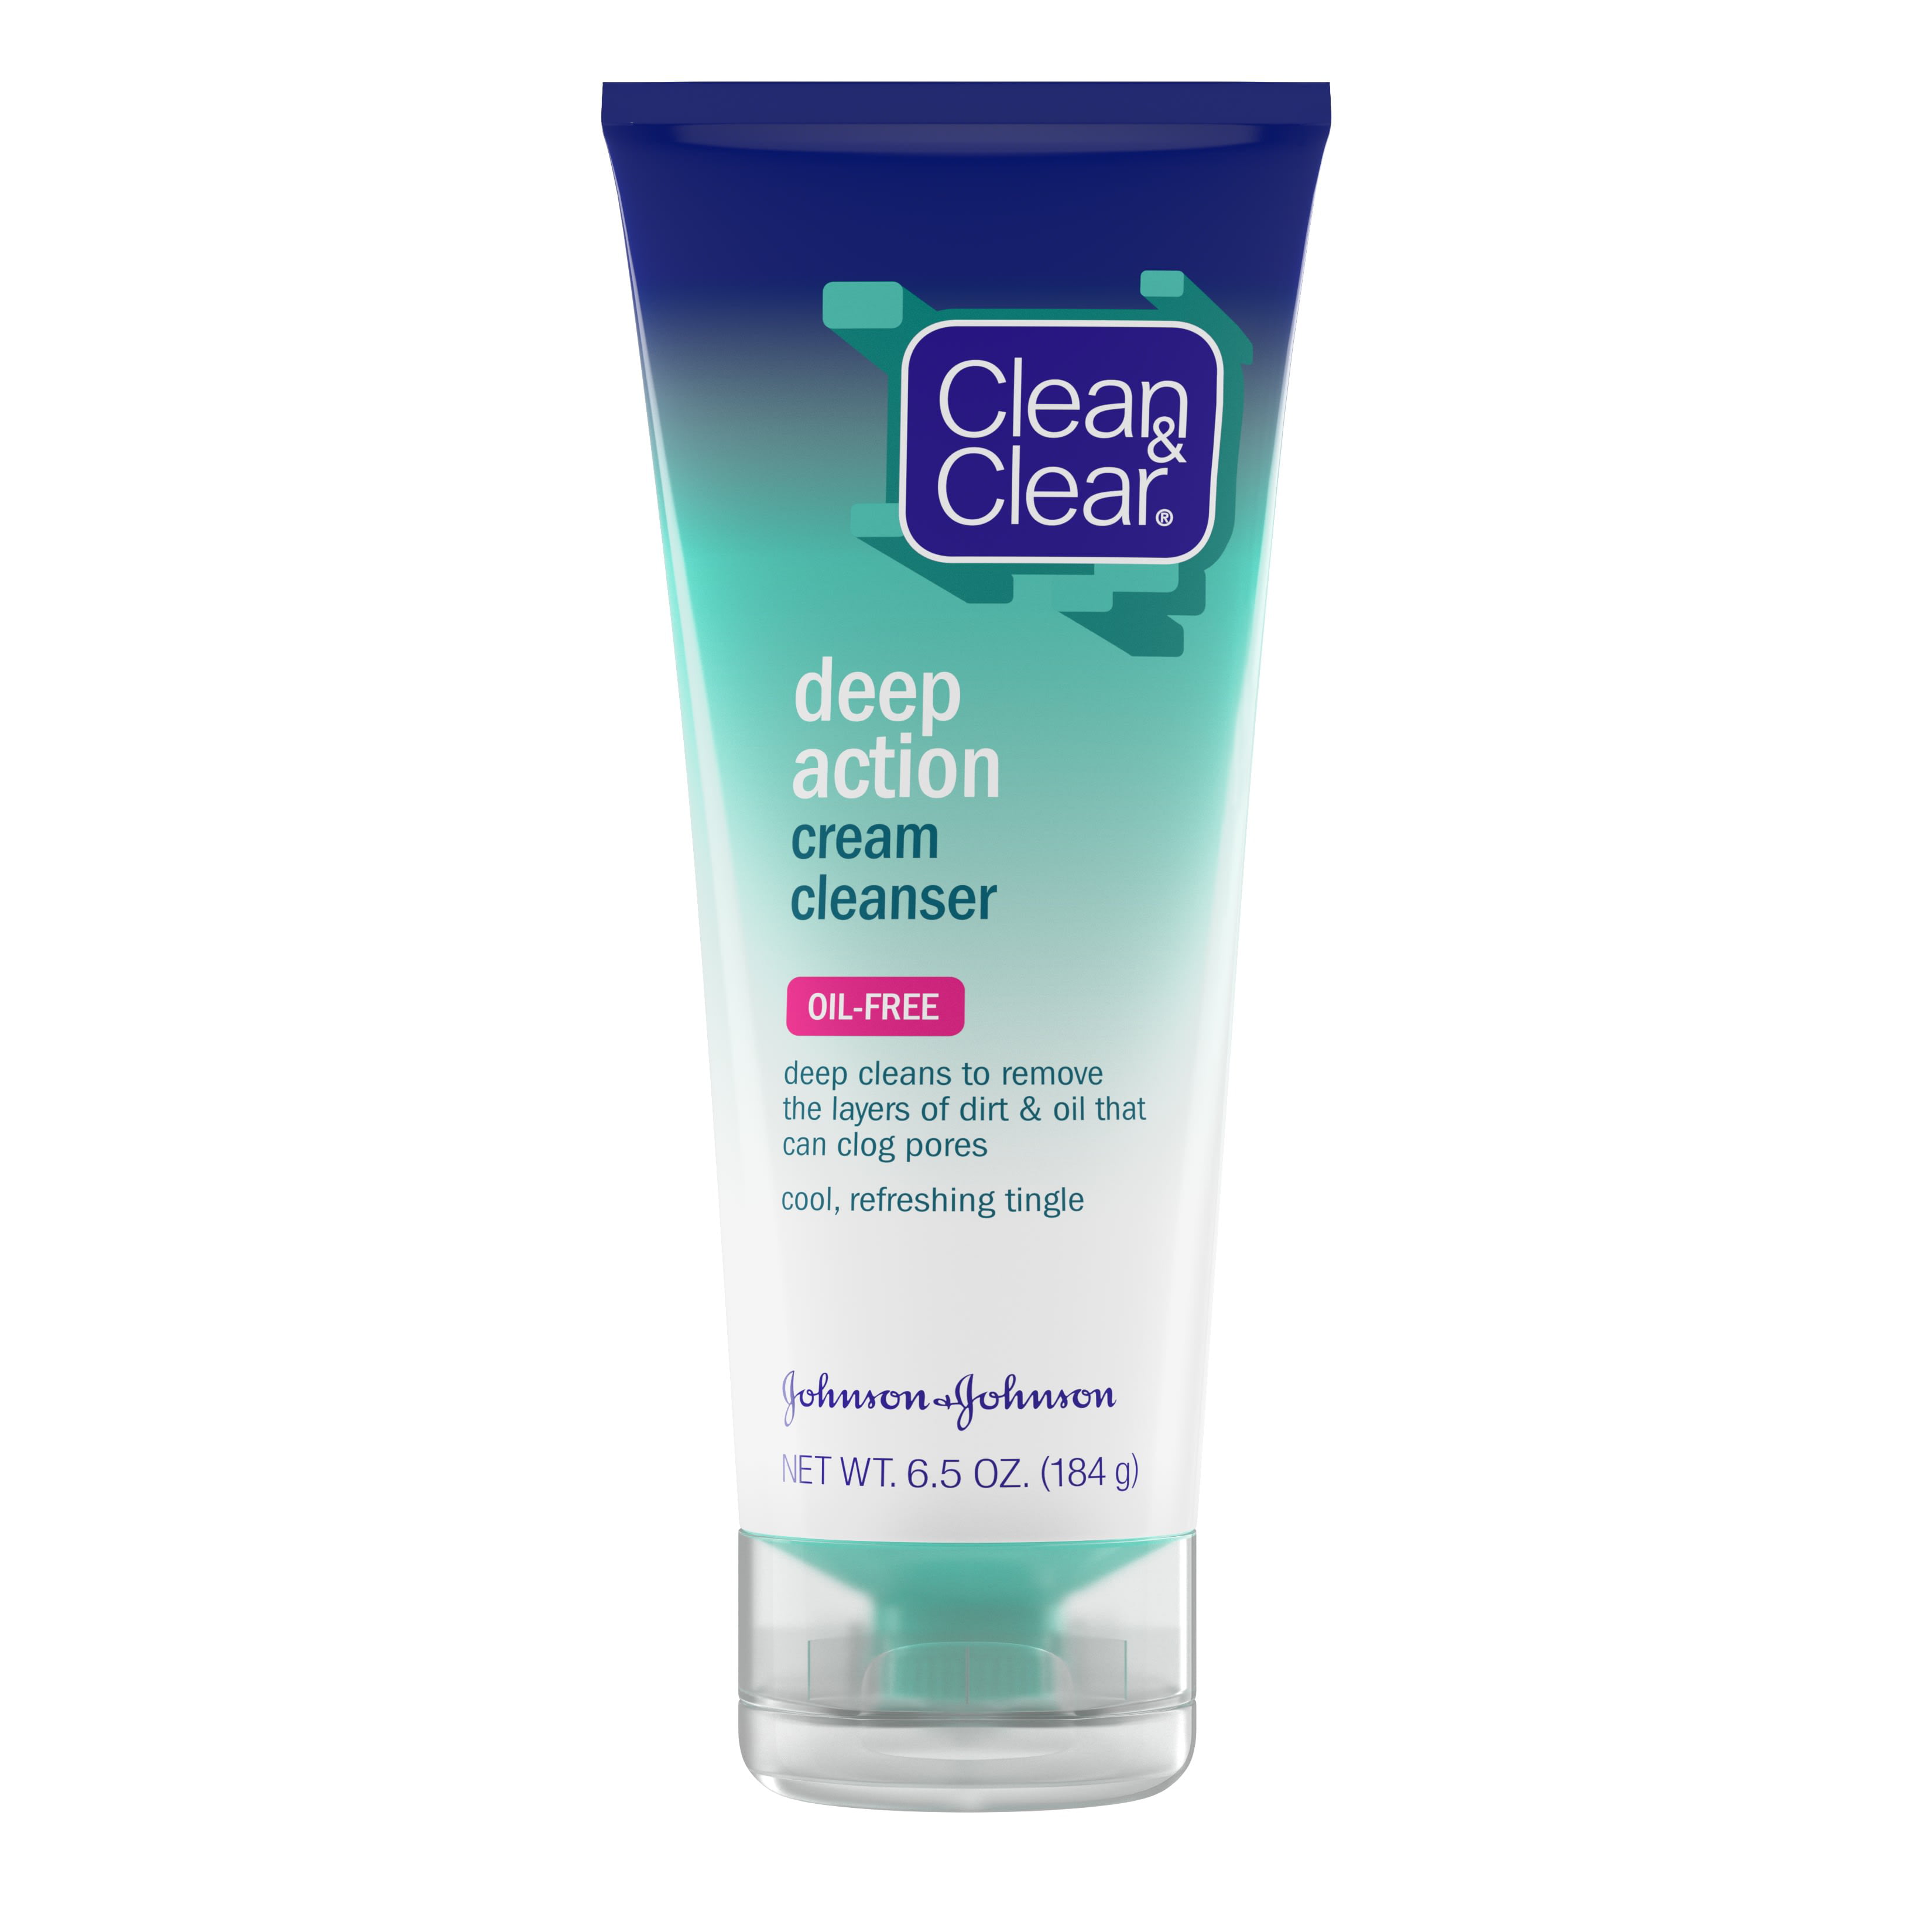 Clean & Clear Oil-Free Deep Action Cream Facial Cleanser, Cooling Daily Face Wash for Deep Pore Cleansing of Acne-Prone Skin, 6.5 oz